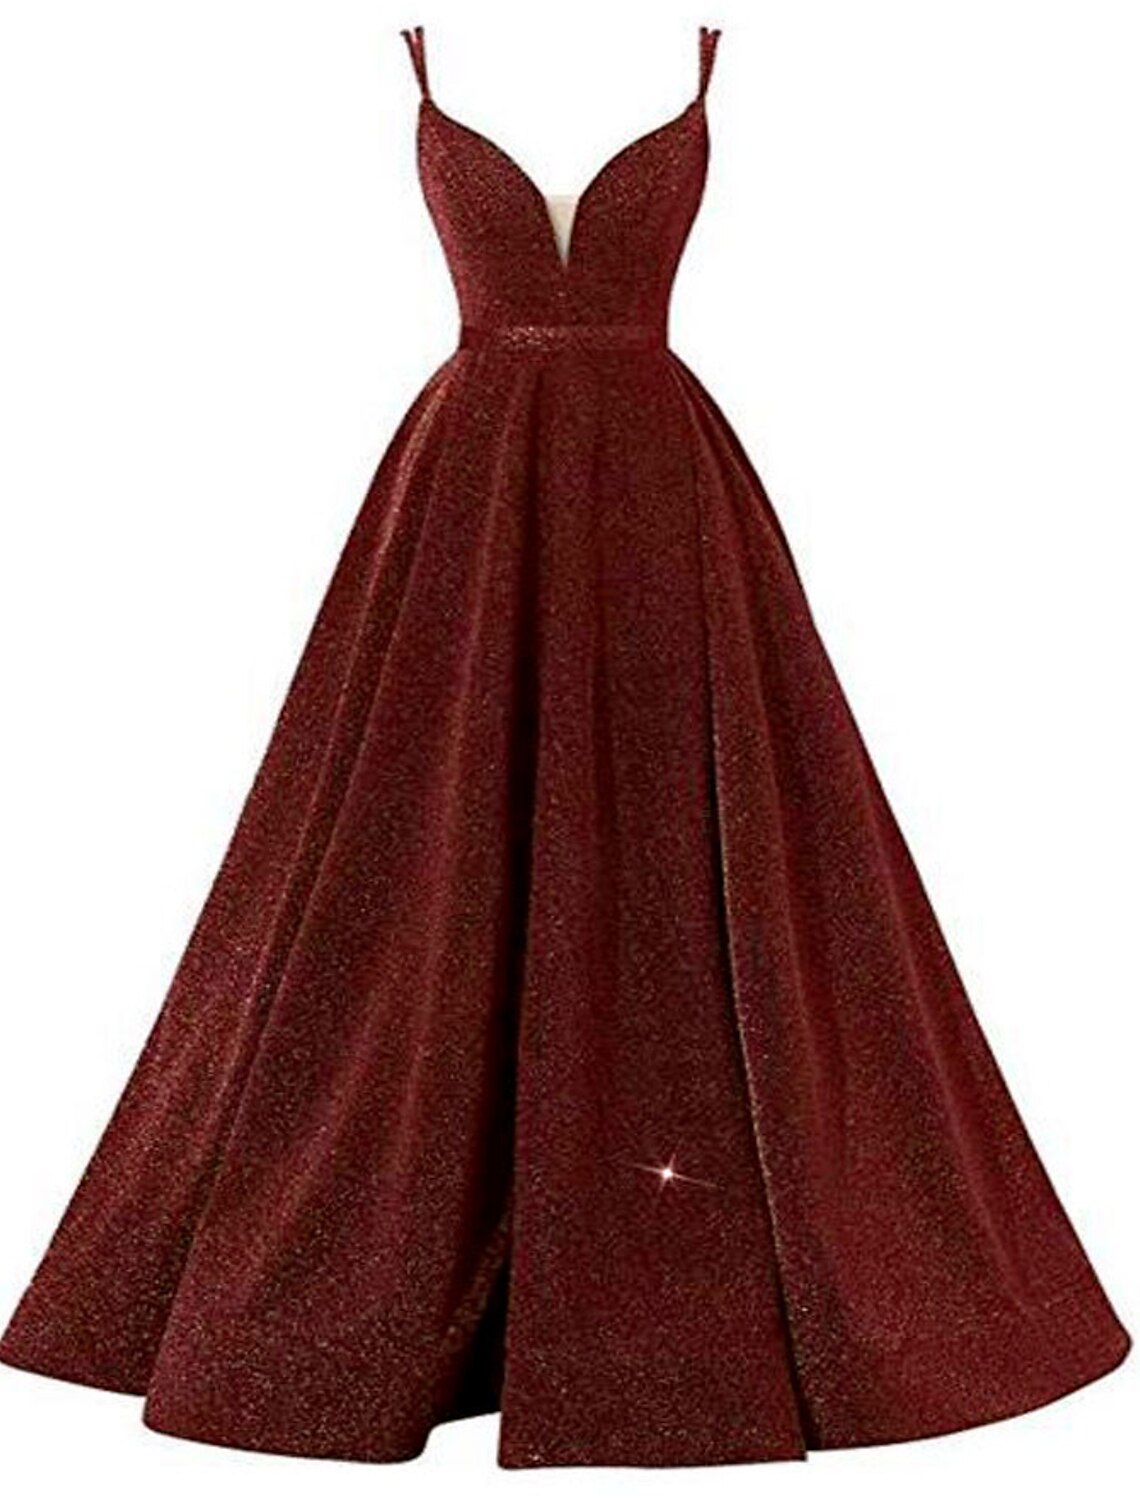 A-Line Prom Dresses Beautiful Back Dress Wedding Guest Formal Evening Floor Length Sleeveless Spaghetti Strap Sequined with Pleats Sequin